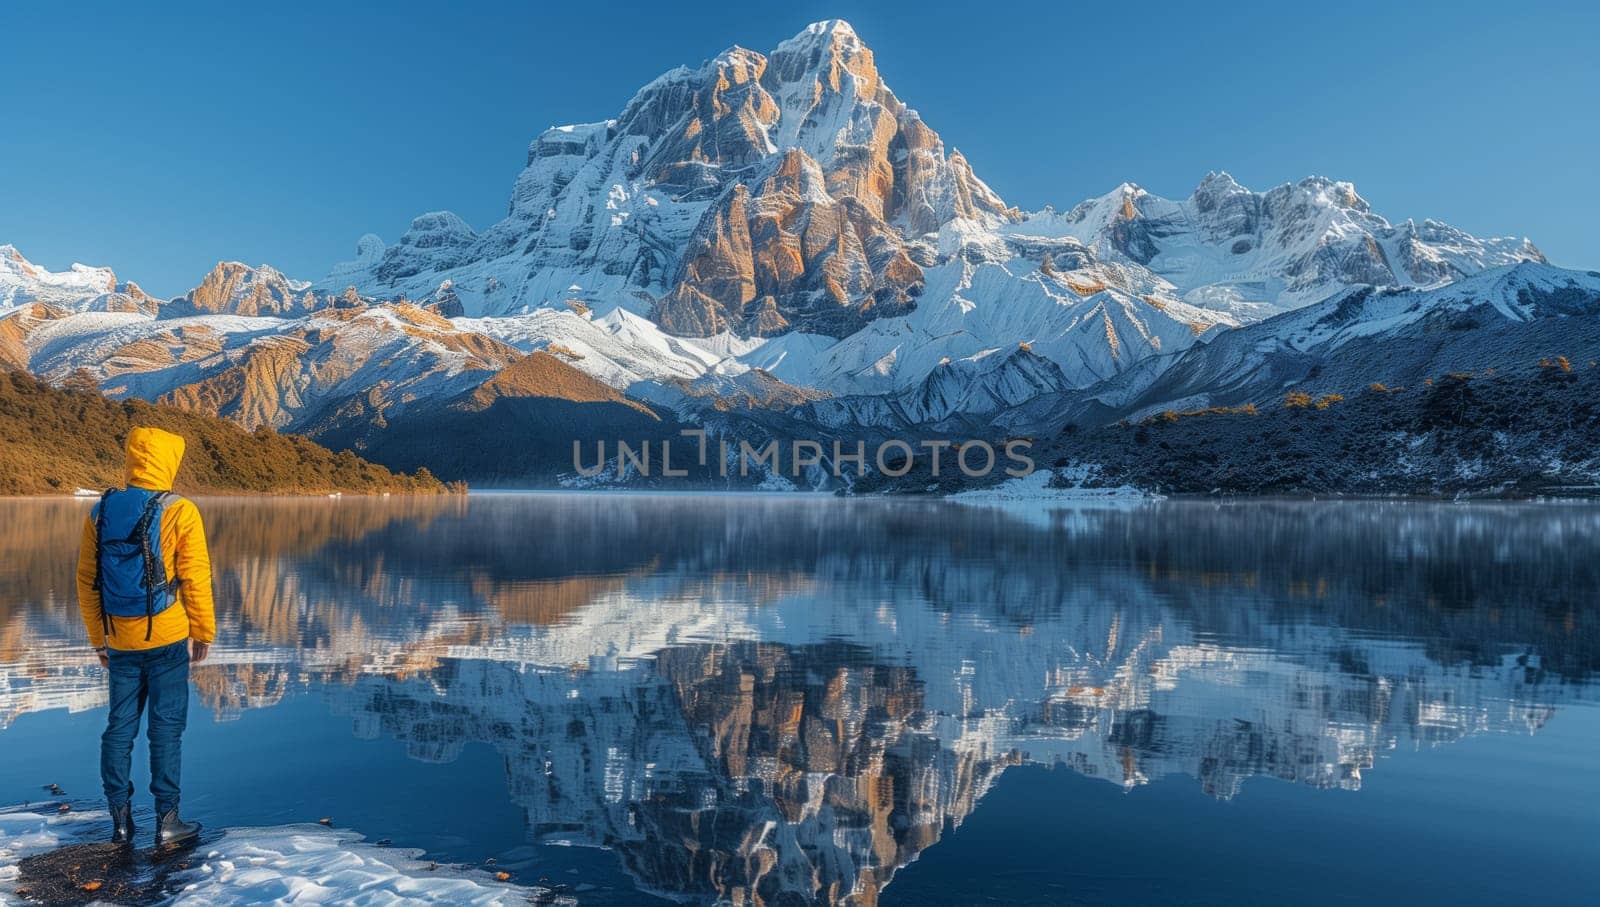 Person by lake with mountain, snow, and ice cap in background by richwolf